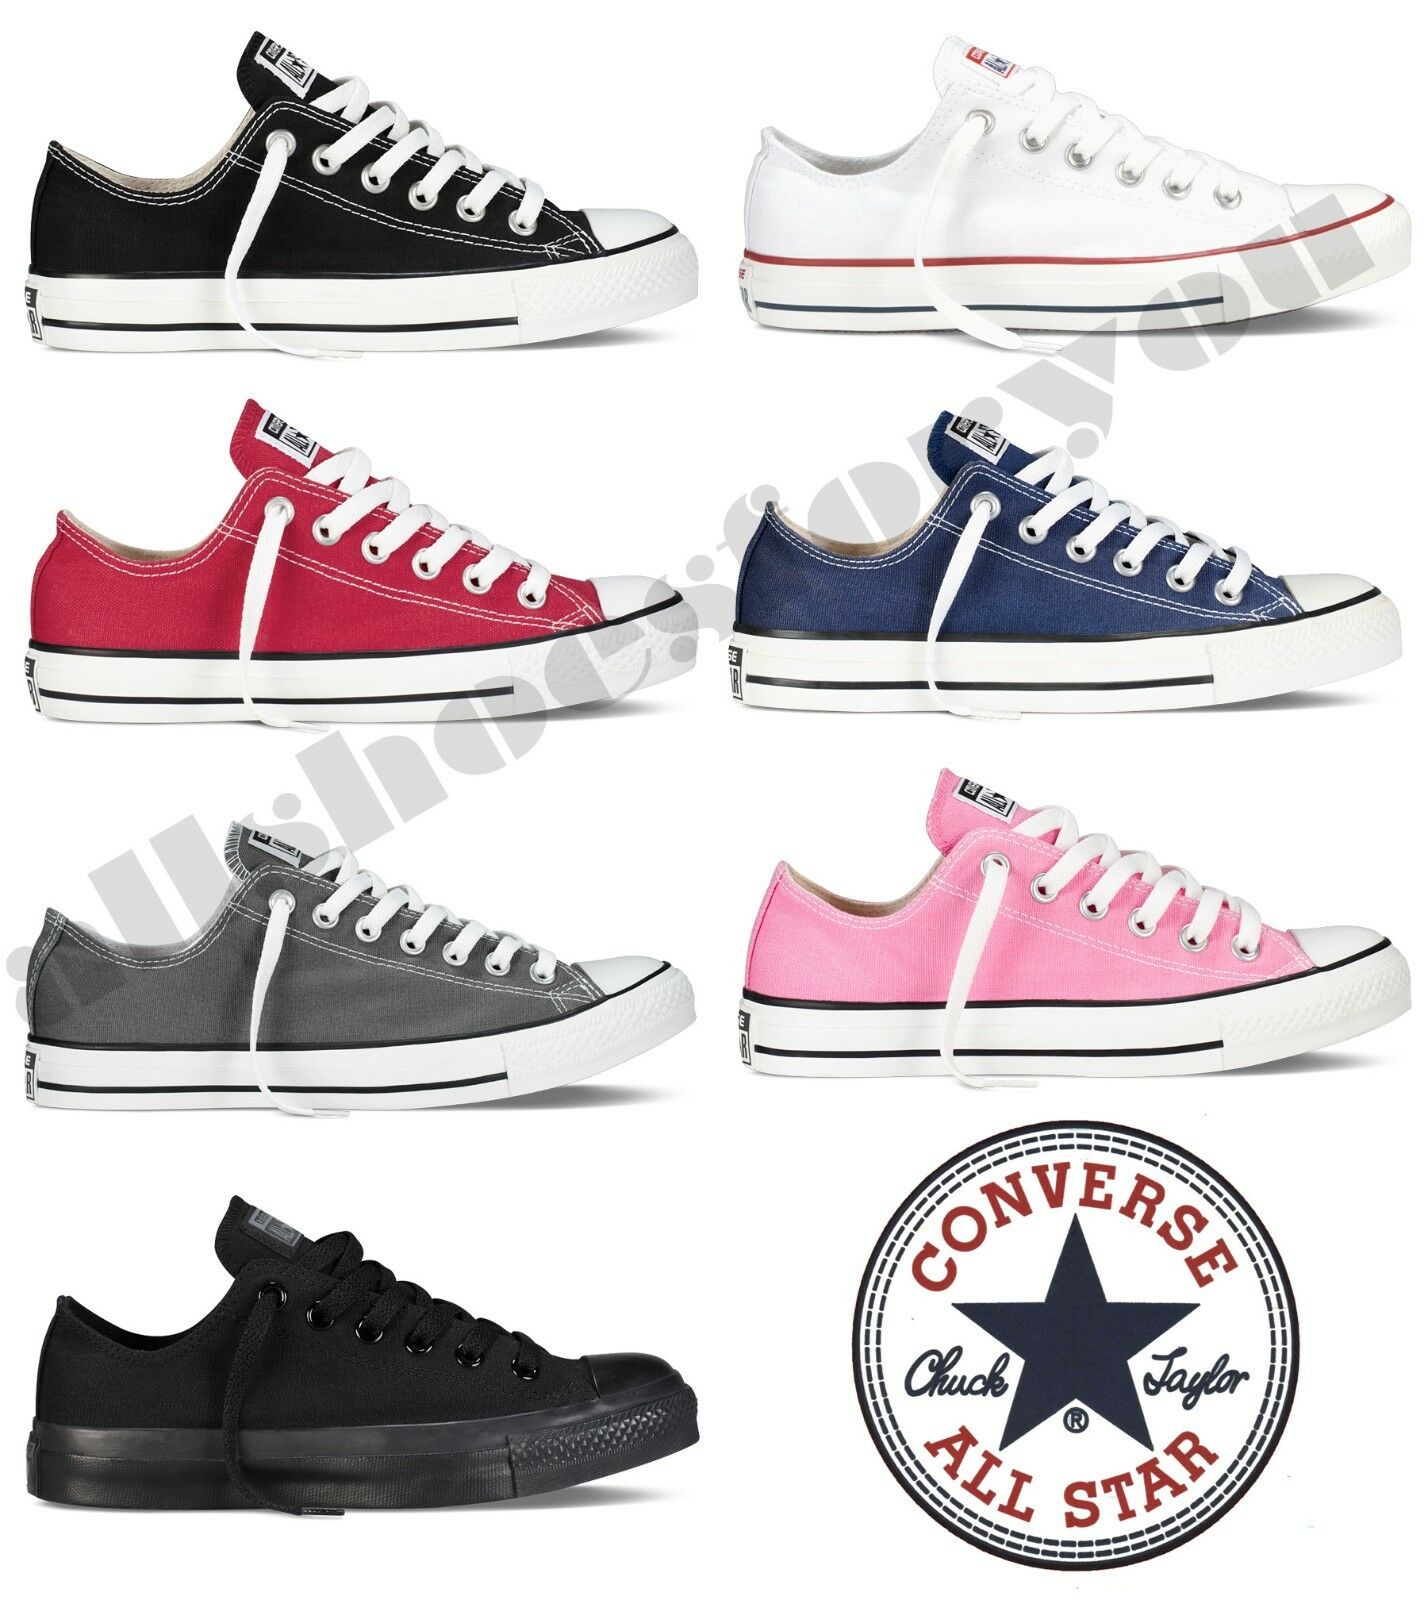 Converse All Star Chuck Taylor Canvas Shoes Low Top All Sizes Free Shipping